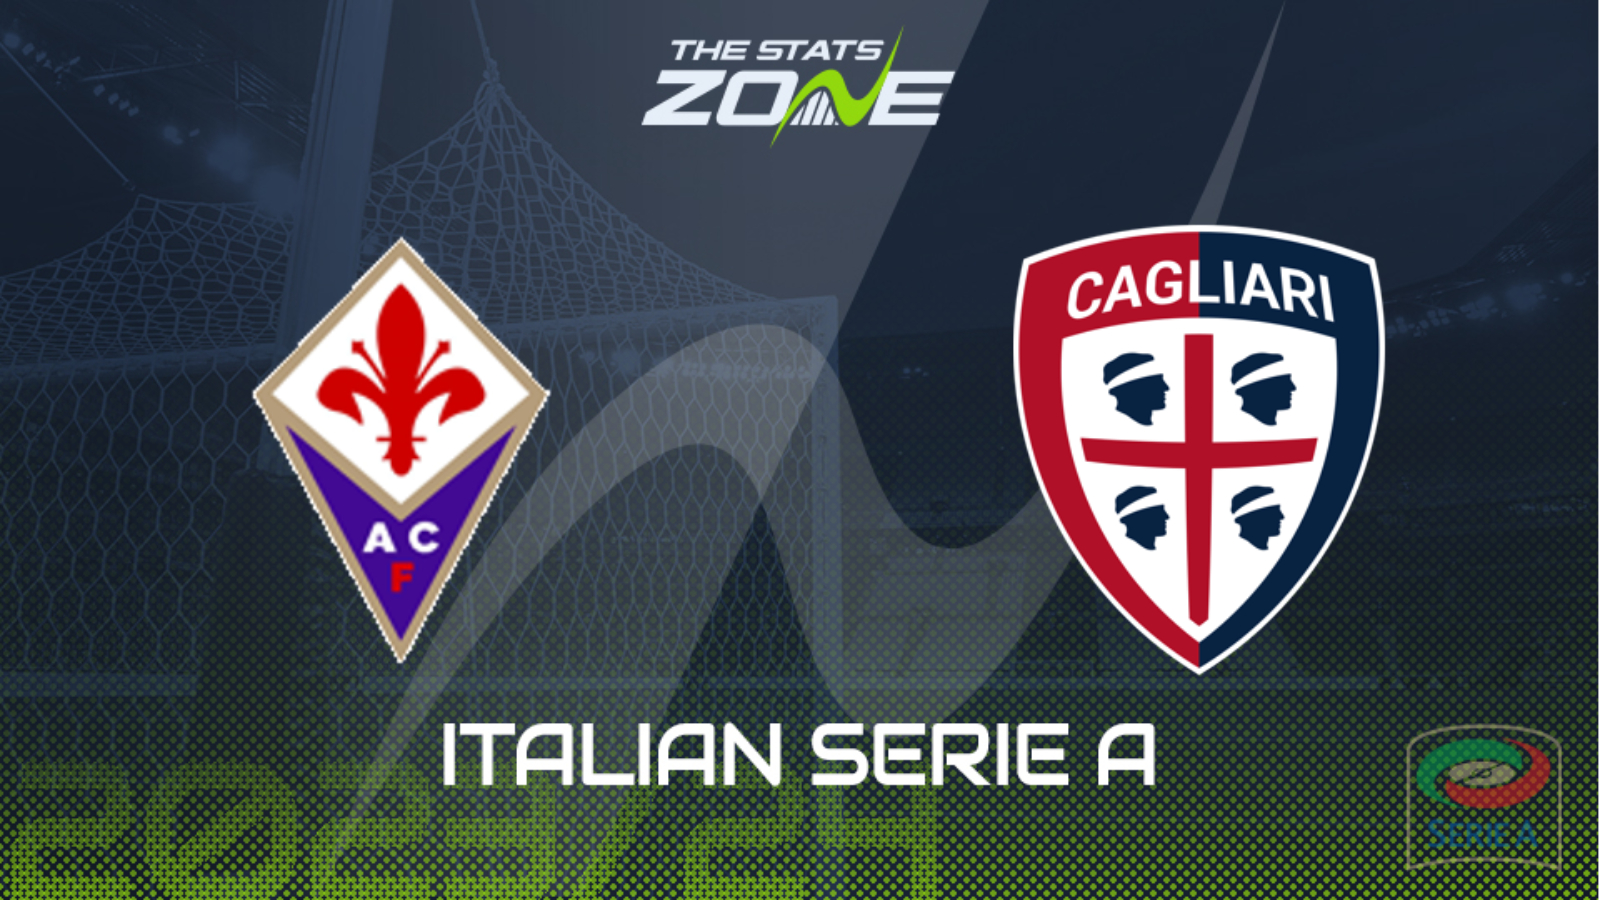 Fiorentina vs Ferencvaros: Preview, kick-off time and where to